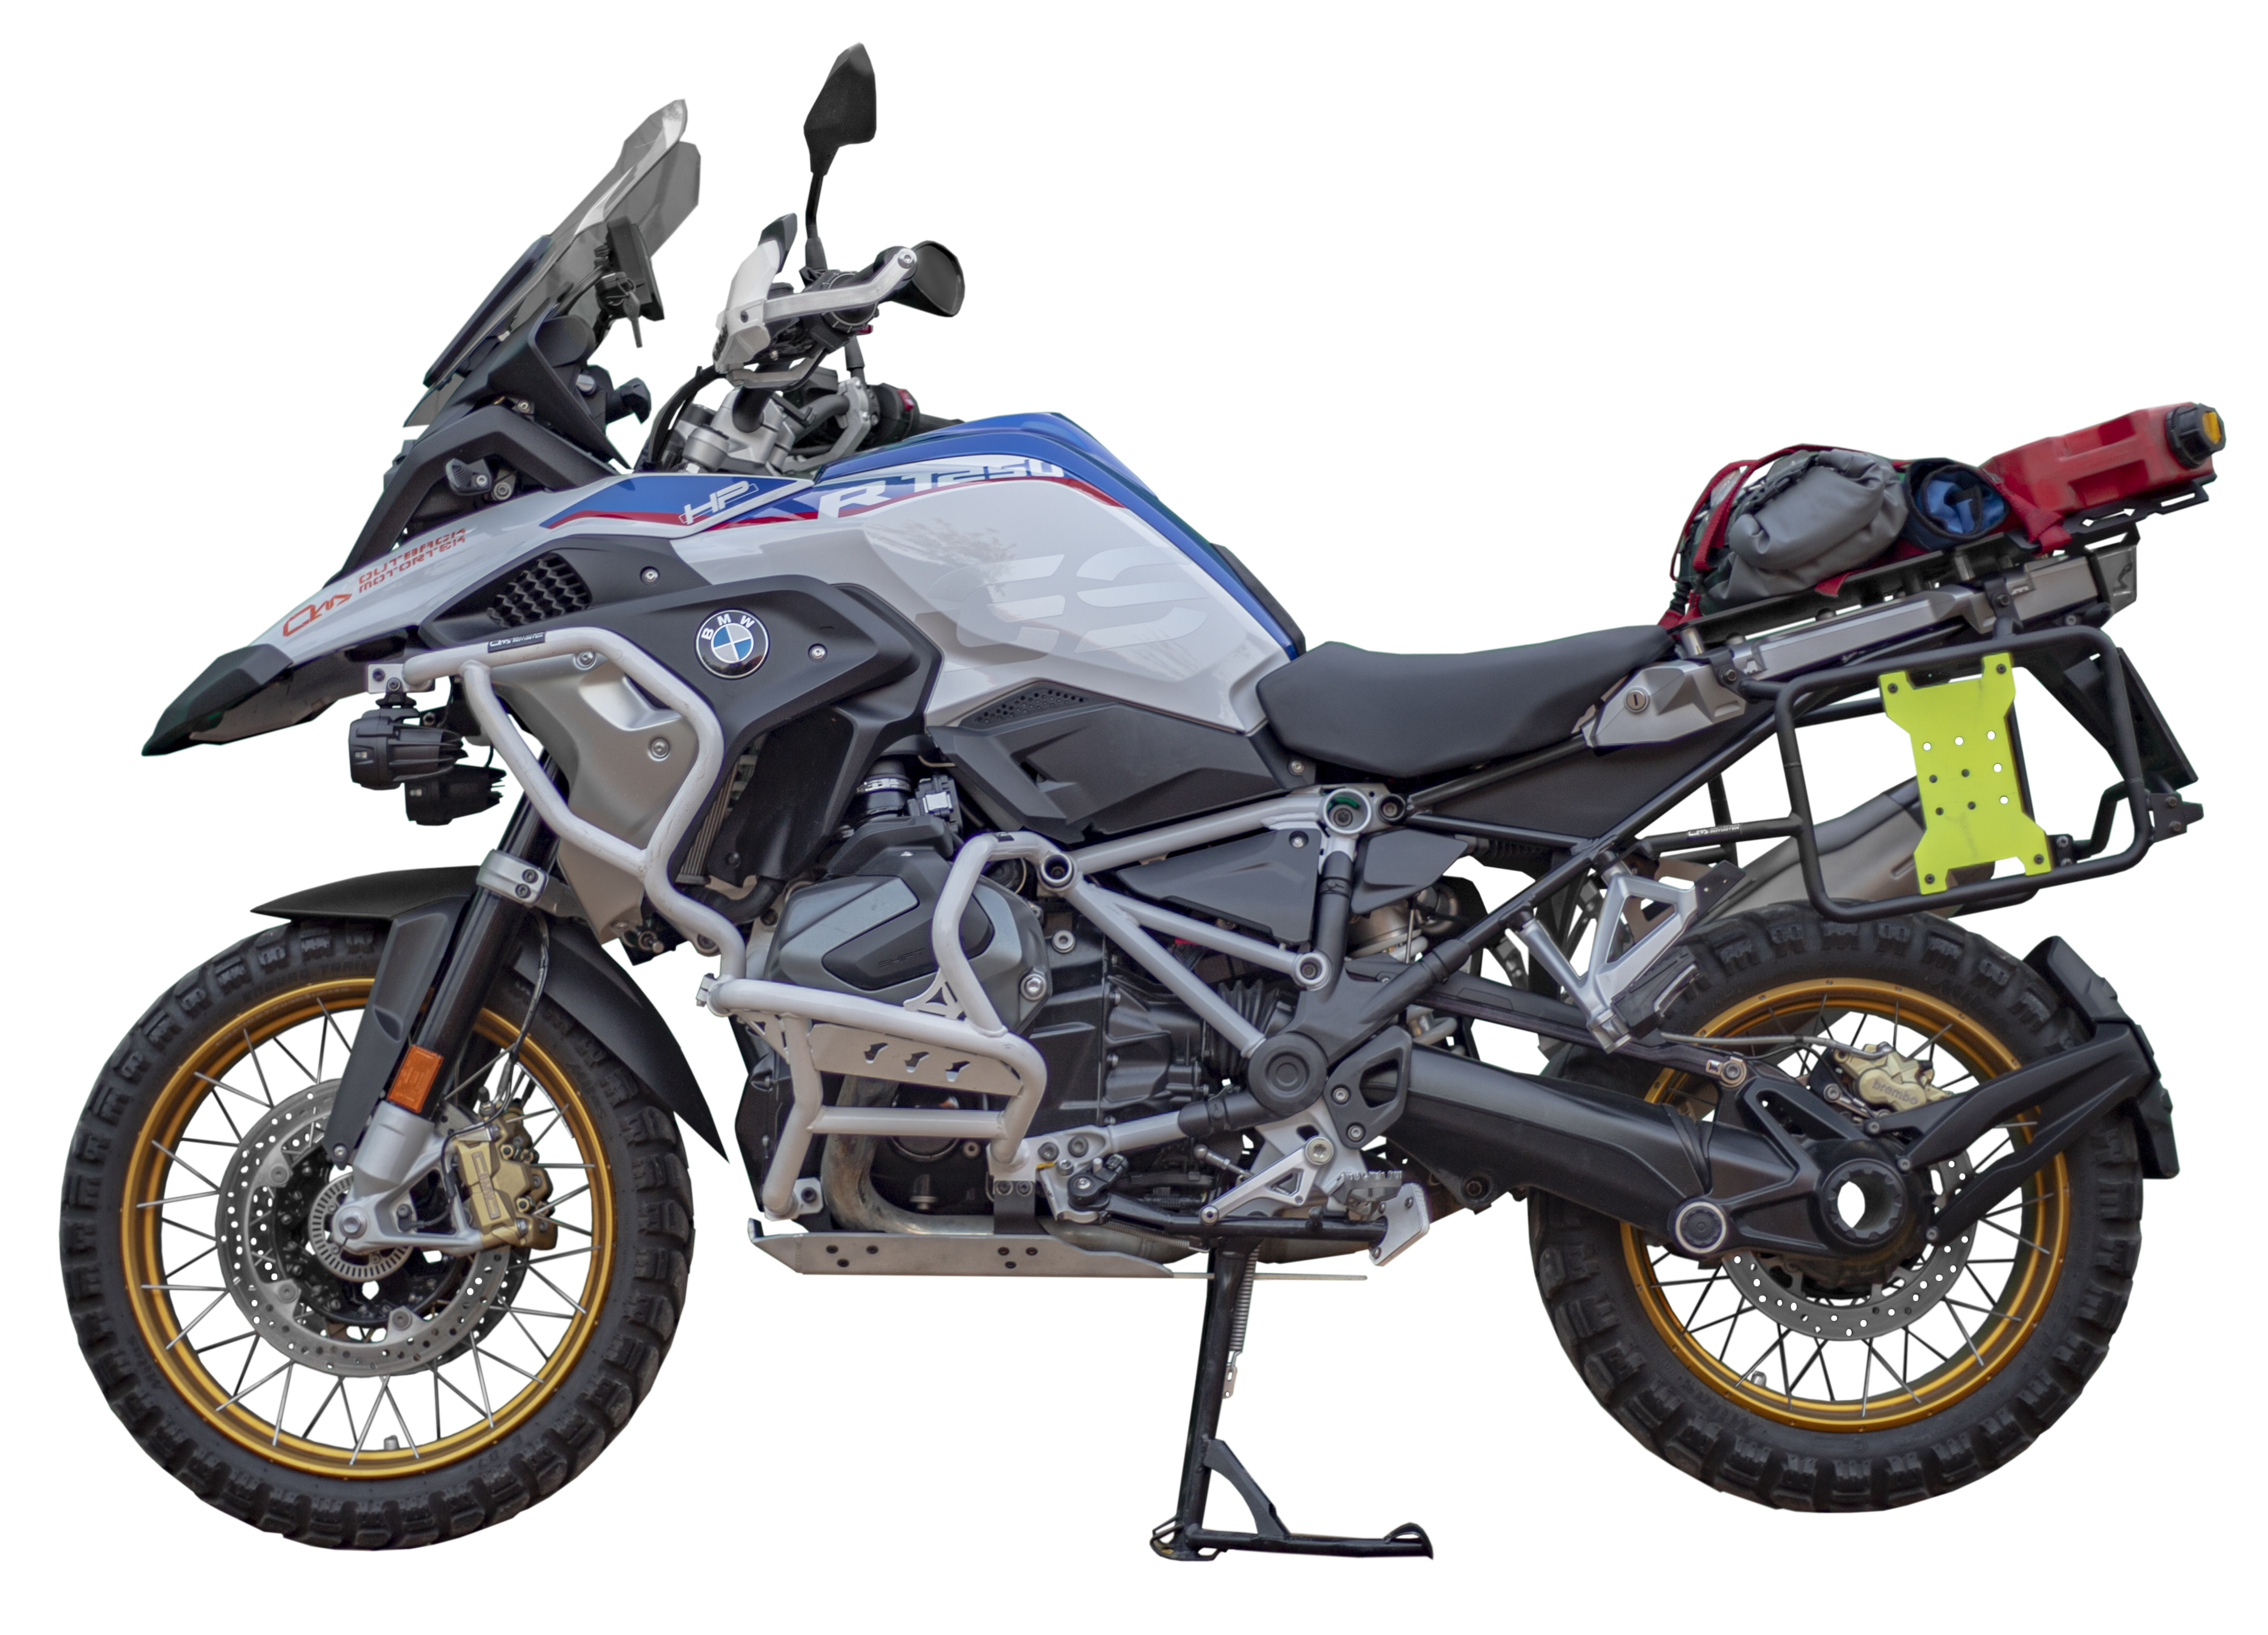 https://east.outbackmotortek.us/wp-content/uploads/2021/10/BMW-R1250GS-Category.png